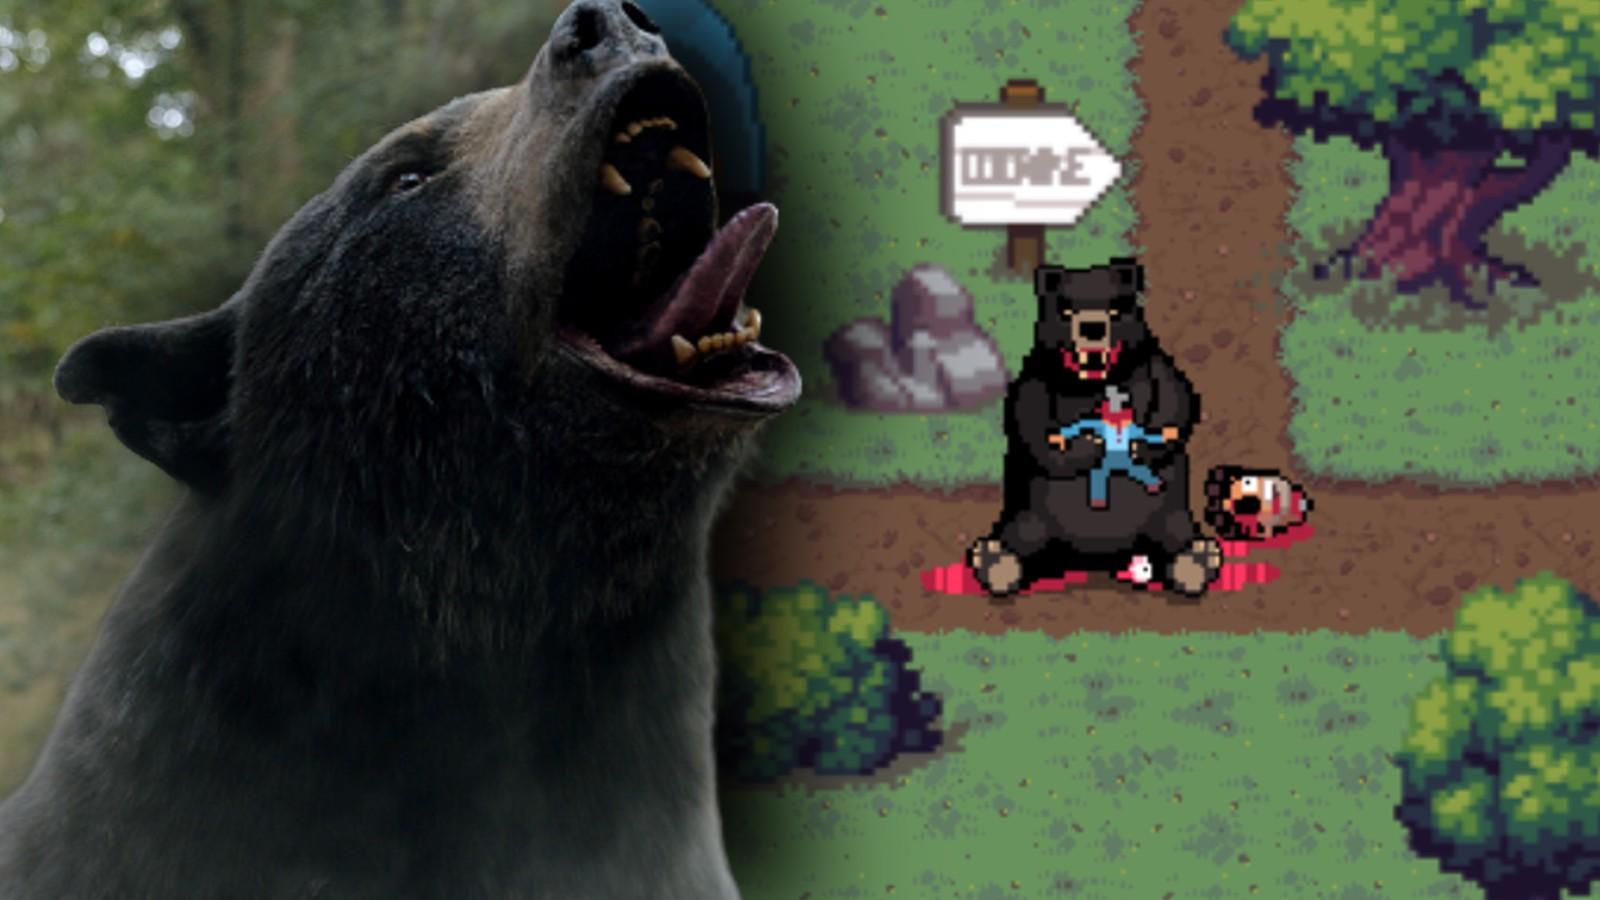 A still from the Cocaine Bear movie and video game